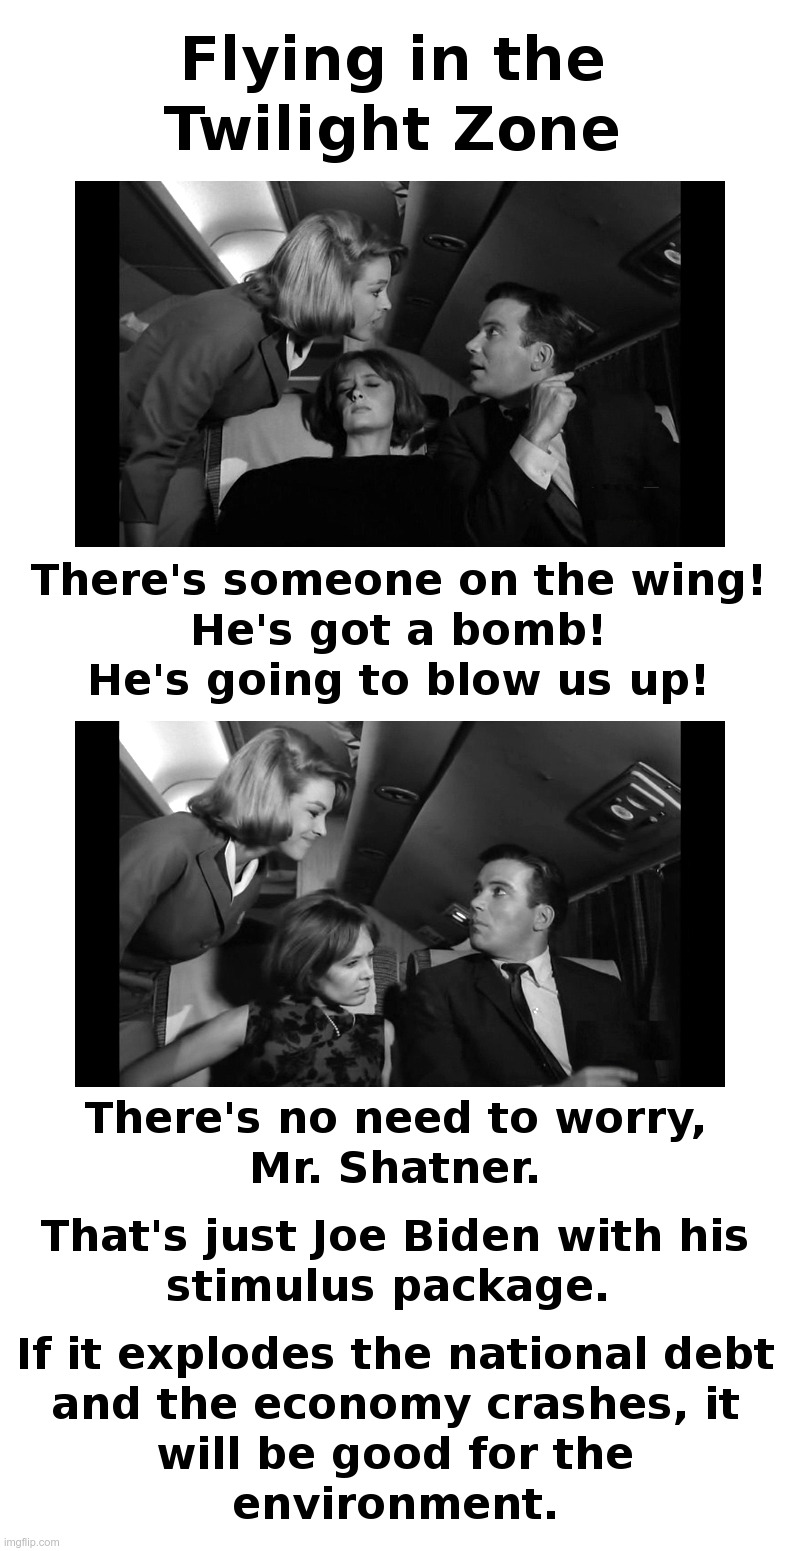 We Are Now Flying in the Twilight Zone | image tagged in the twilight zone,william shatner,joe biden,stimulus,bomb,national debt | made w/ Imgflip meme maker